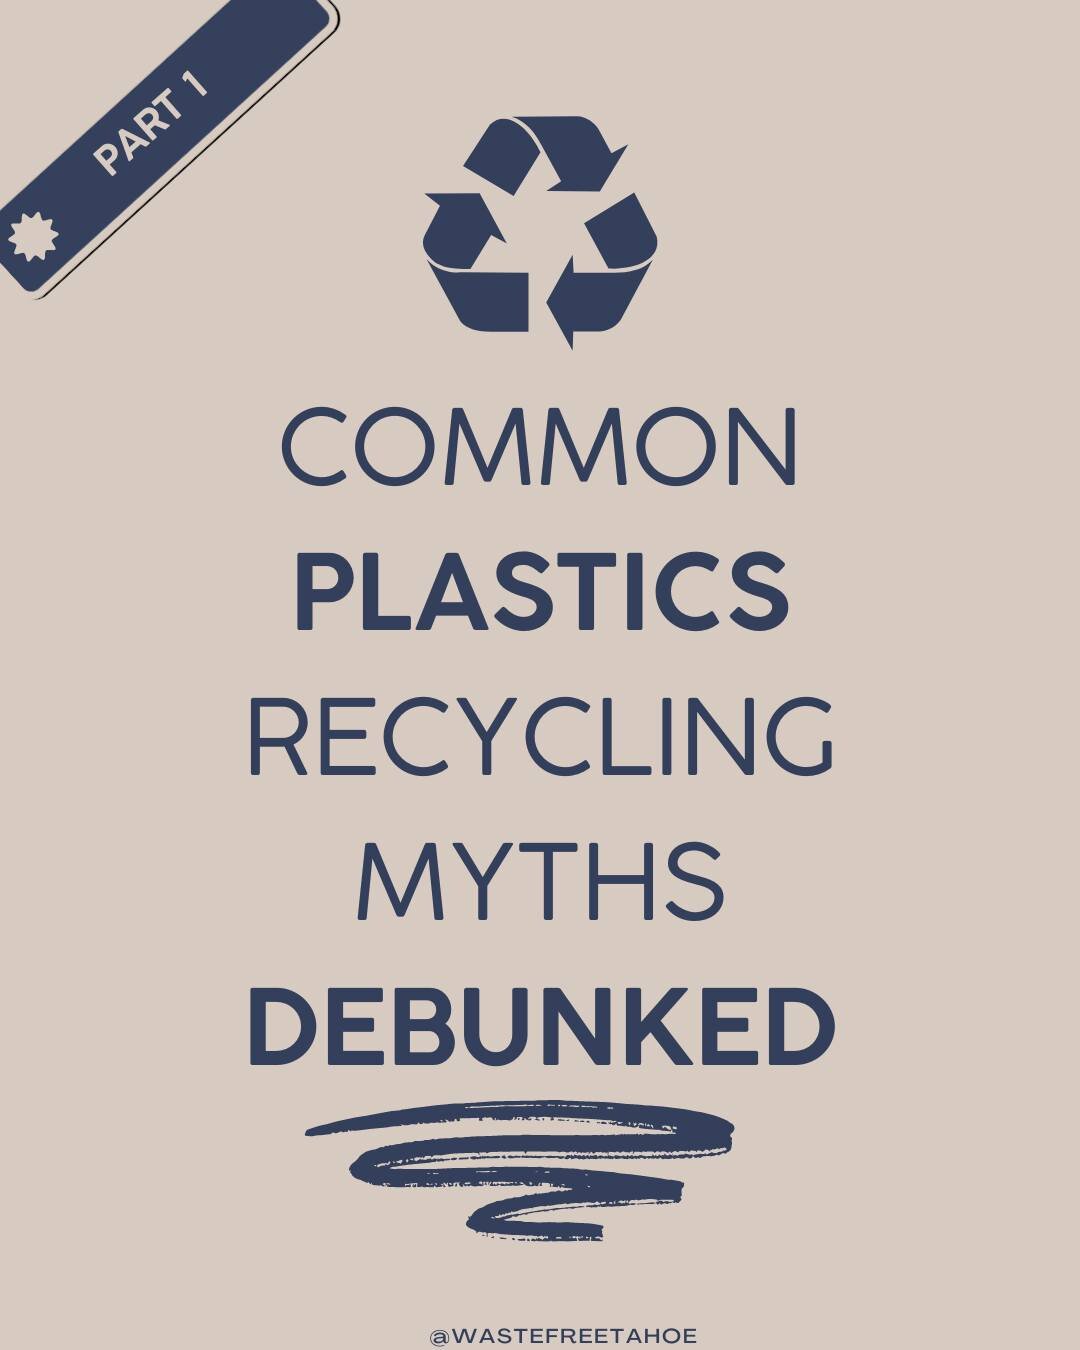 First part of the common plastics recycling myths series! We hear a lot of things about plastics' recycling so we thought we'd share some of them with you. Keep reading to learn more ♻️ and stay tuned for more parts of the series!

False: All plastic